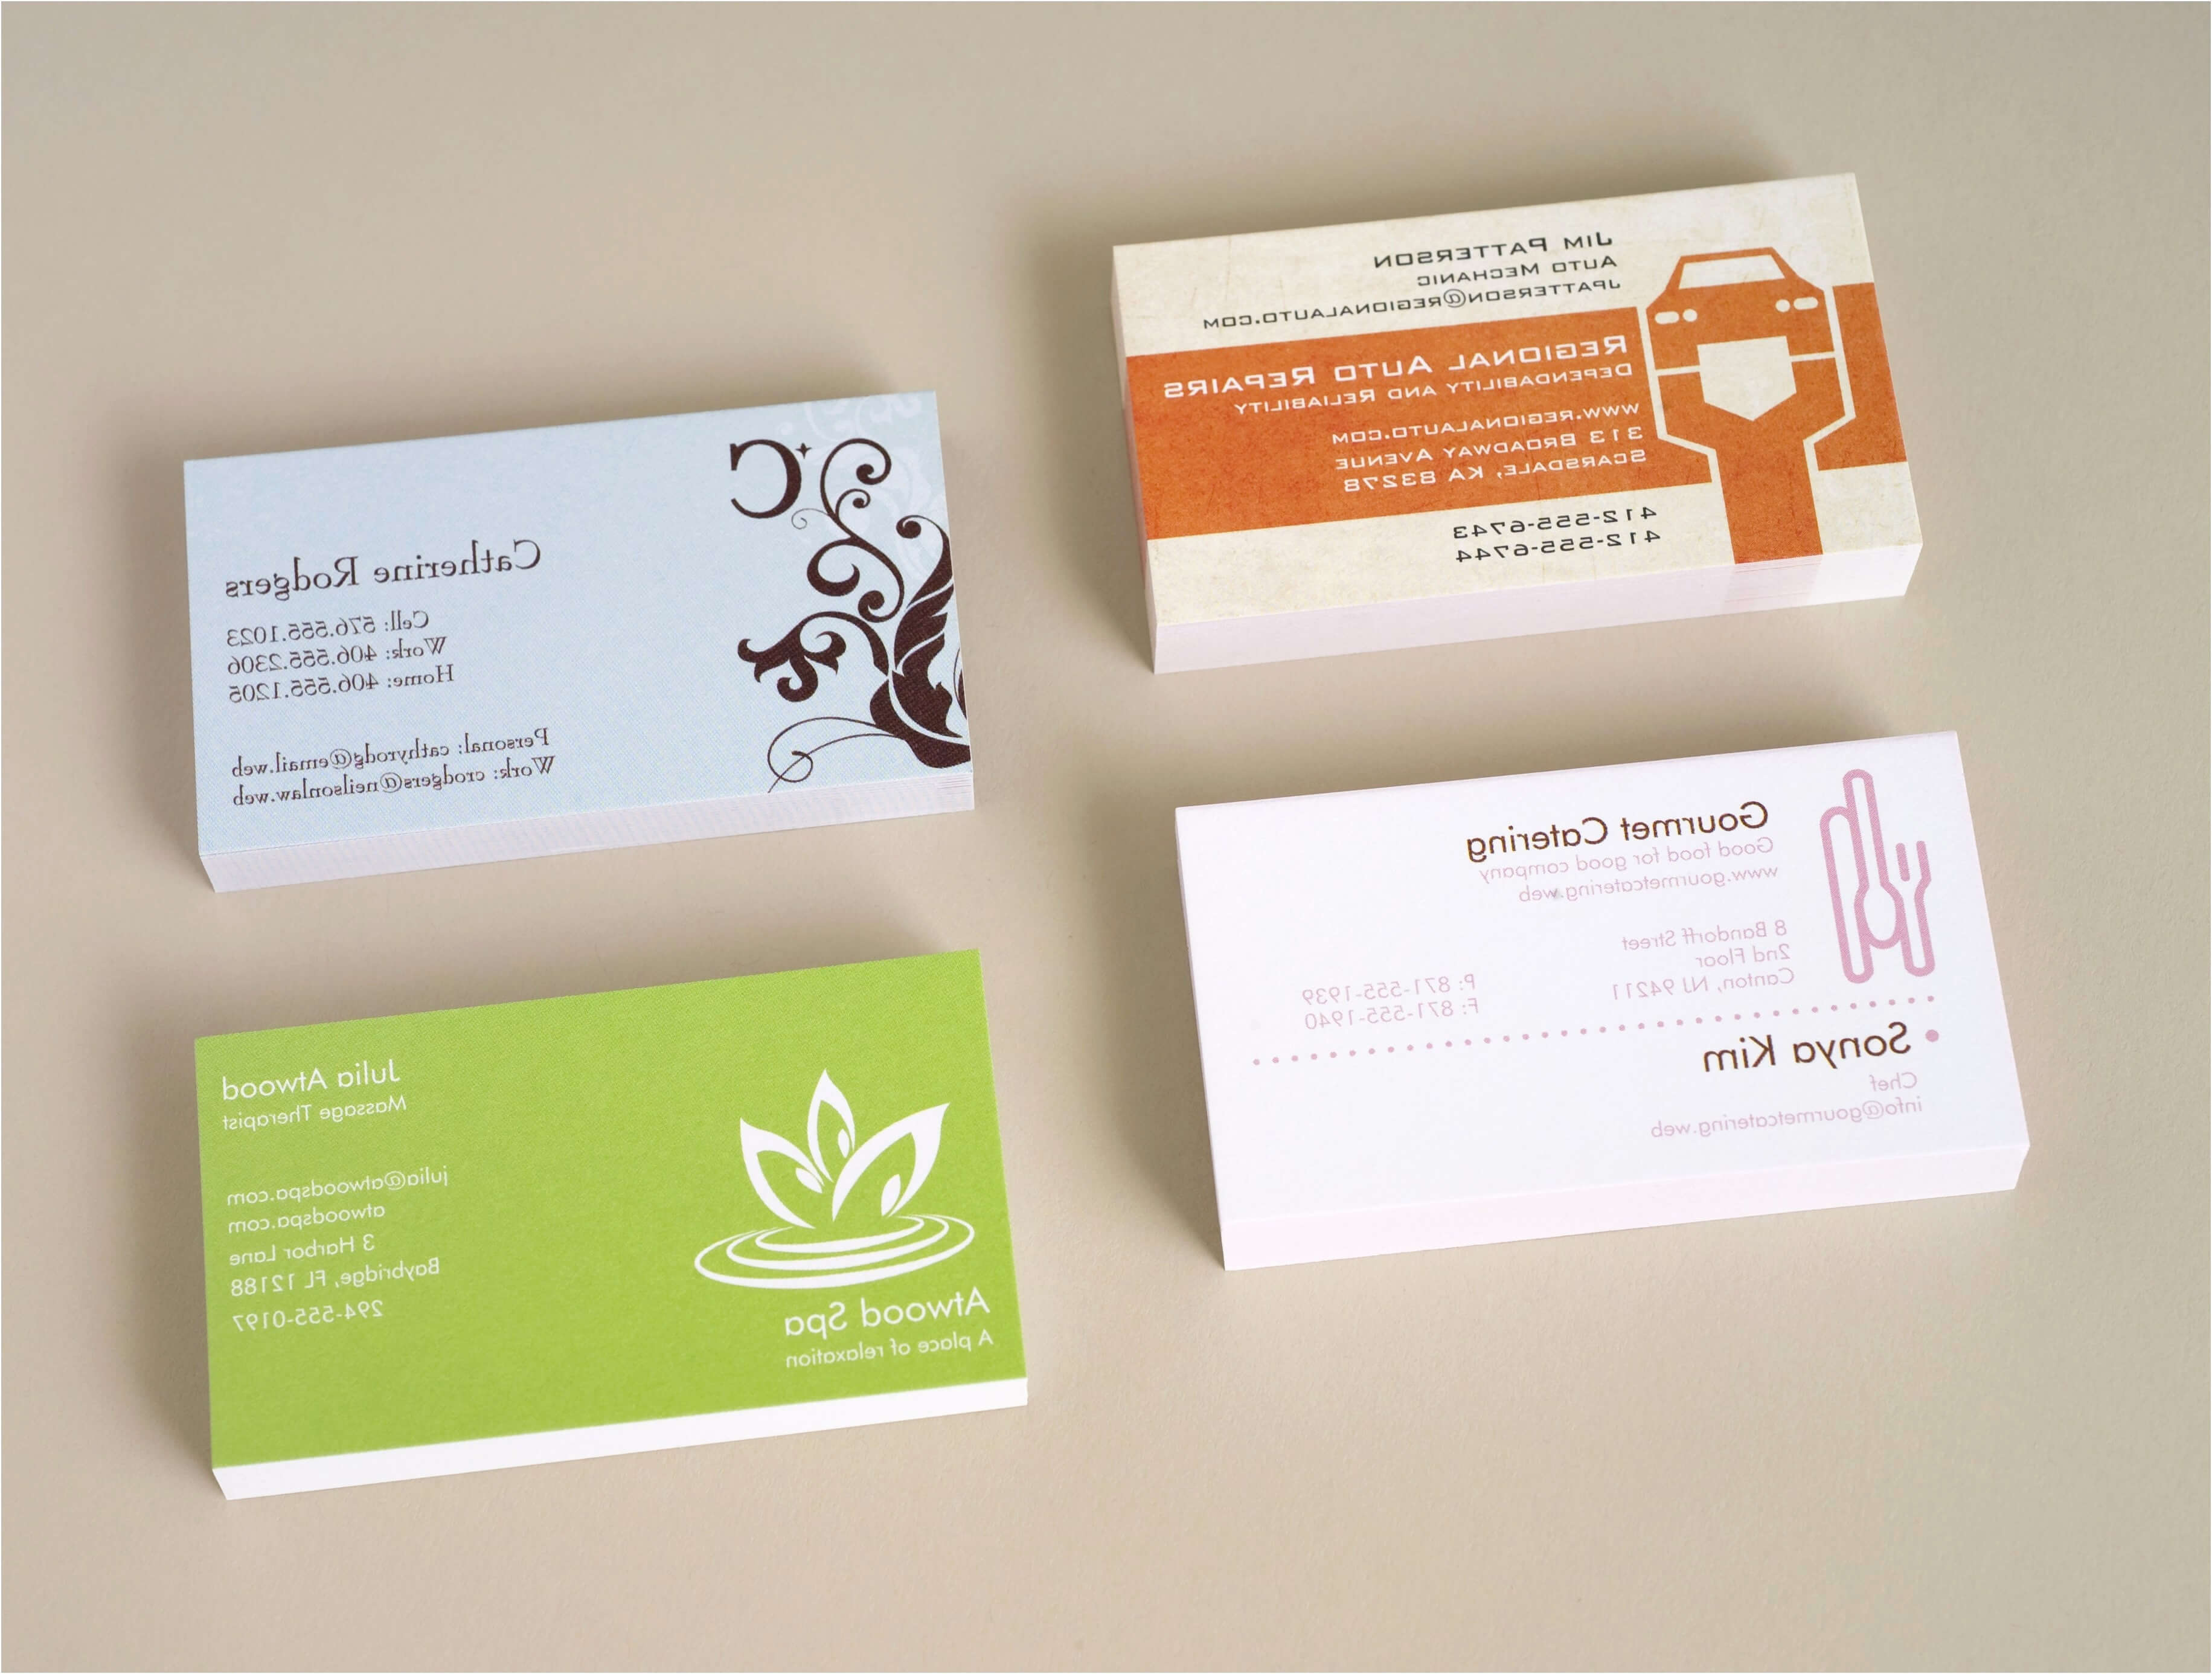 97 Jukebox Business Cards | Jnutella Intended For Christian Business Cards Templates Free